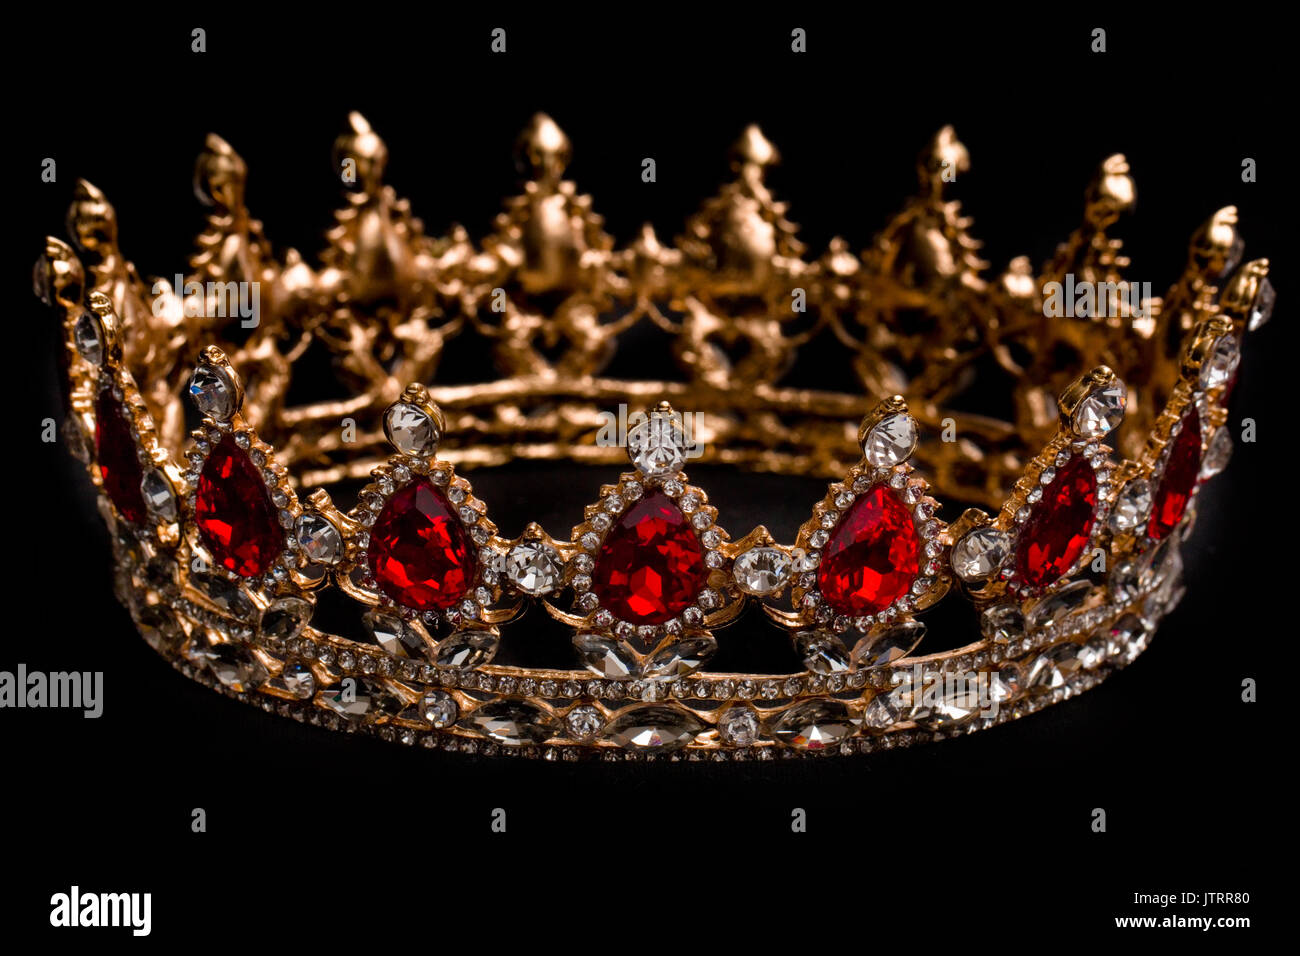 A King or Queen's Golden Crown Stock Photo - Alamy